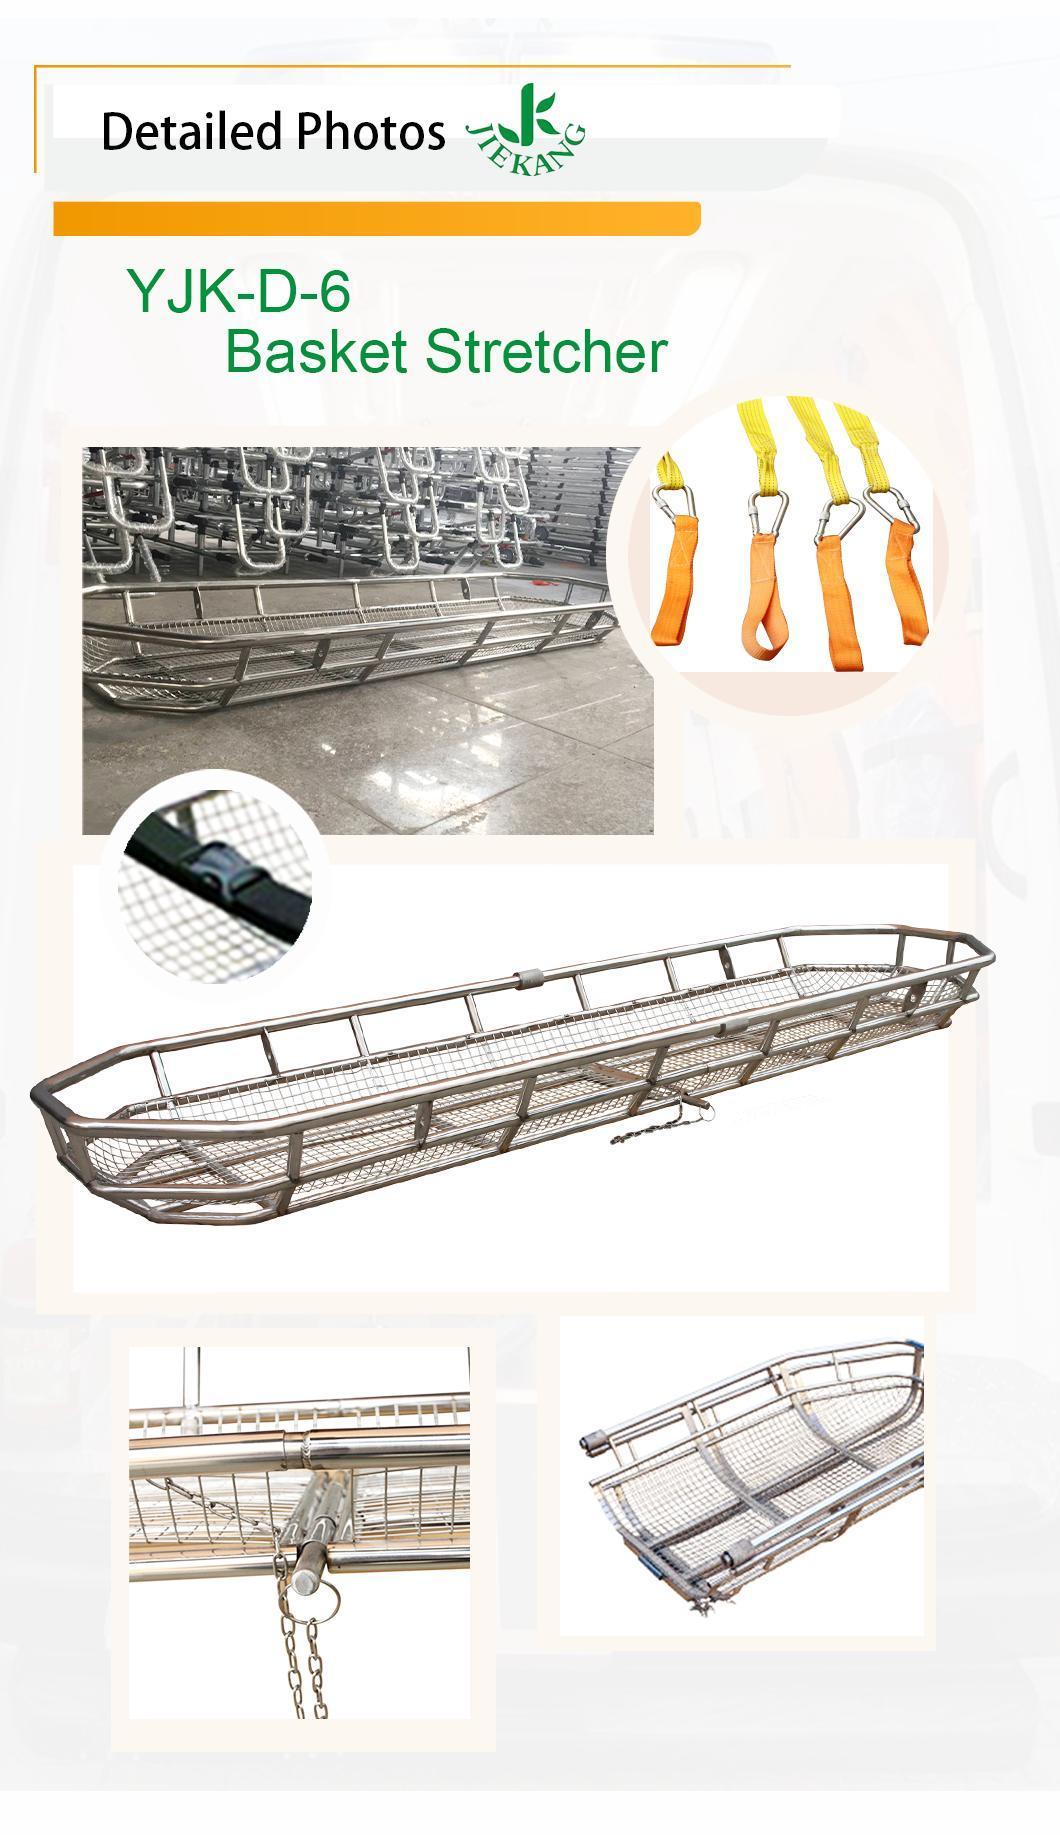 Emergency Stainless Steel Detachable Helicopter Basket Stretcher for Sale